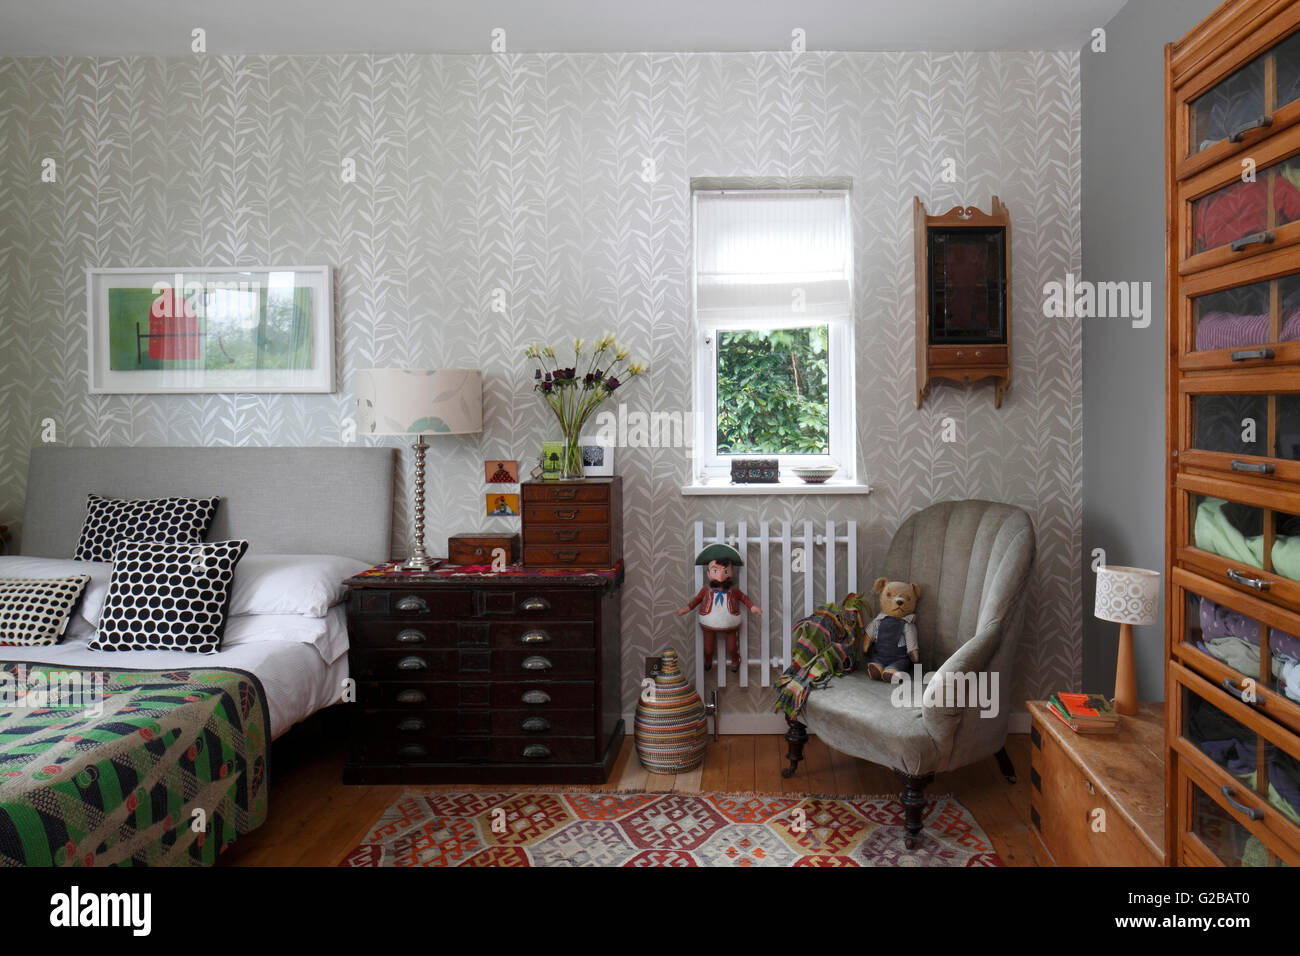 Bedroom with silver patterned wallpaper and a vintage shop fitting clothes storage. Black and white pillows on bed and grey chair in corner of room with stuffed animals. Stock Photo